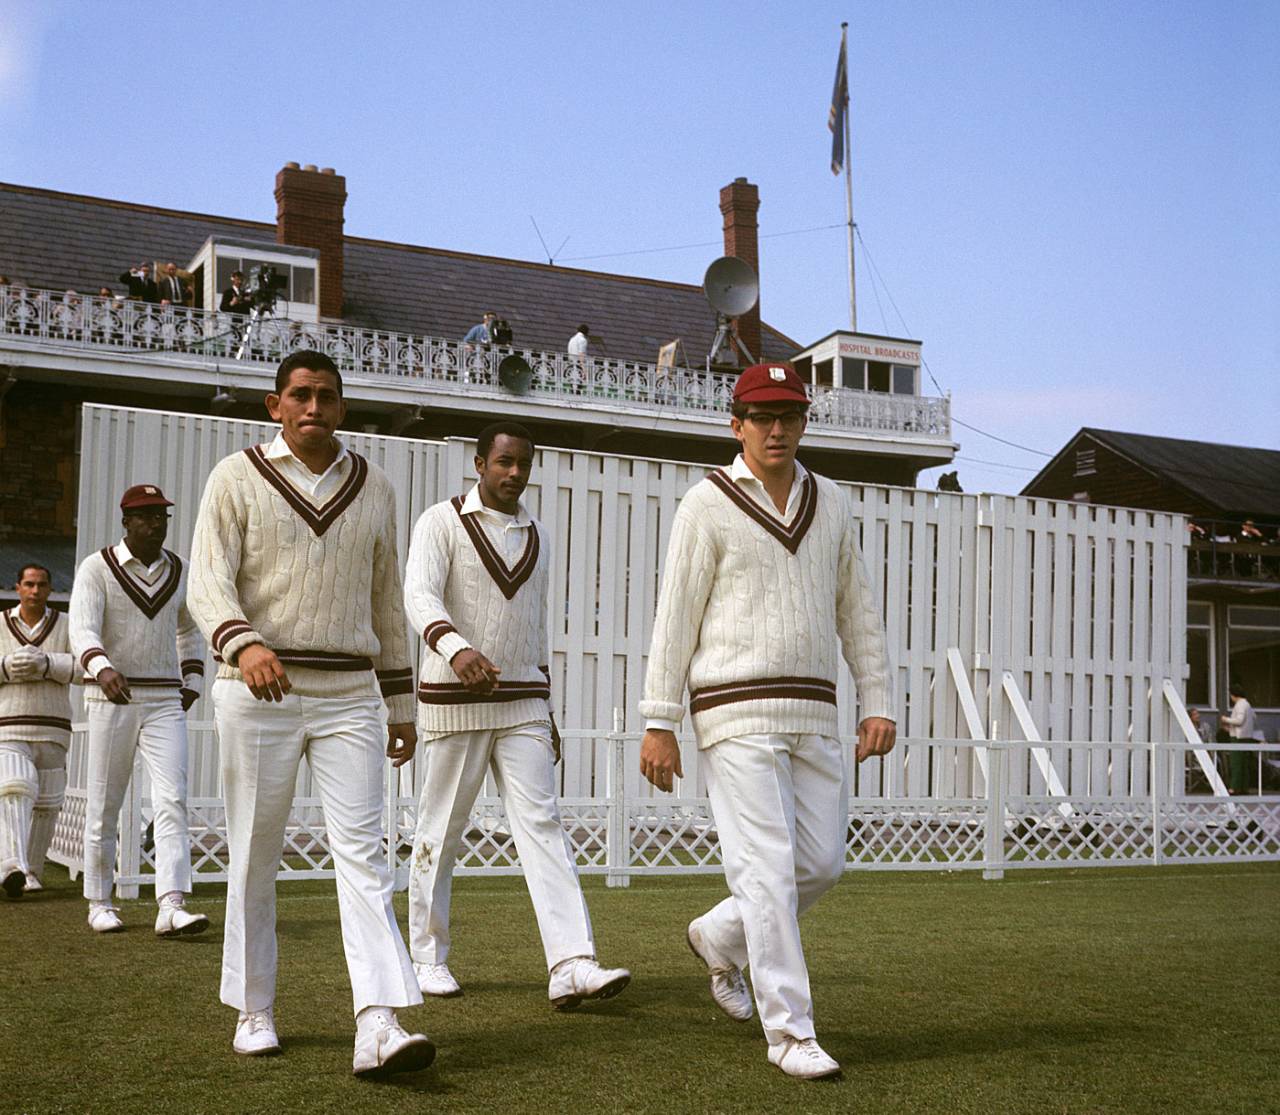 Steve Camacho takes the field with his team-mates, England, May, 1969